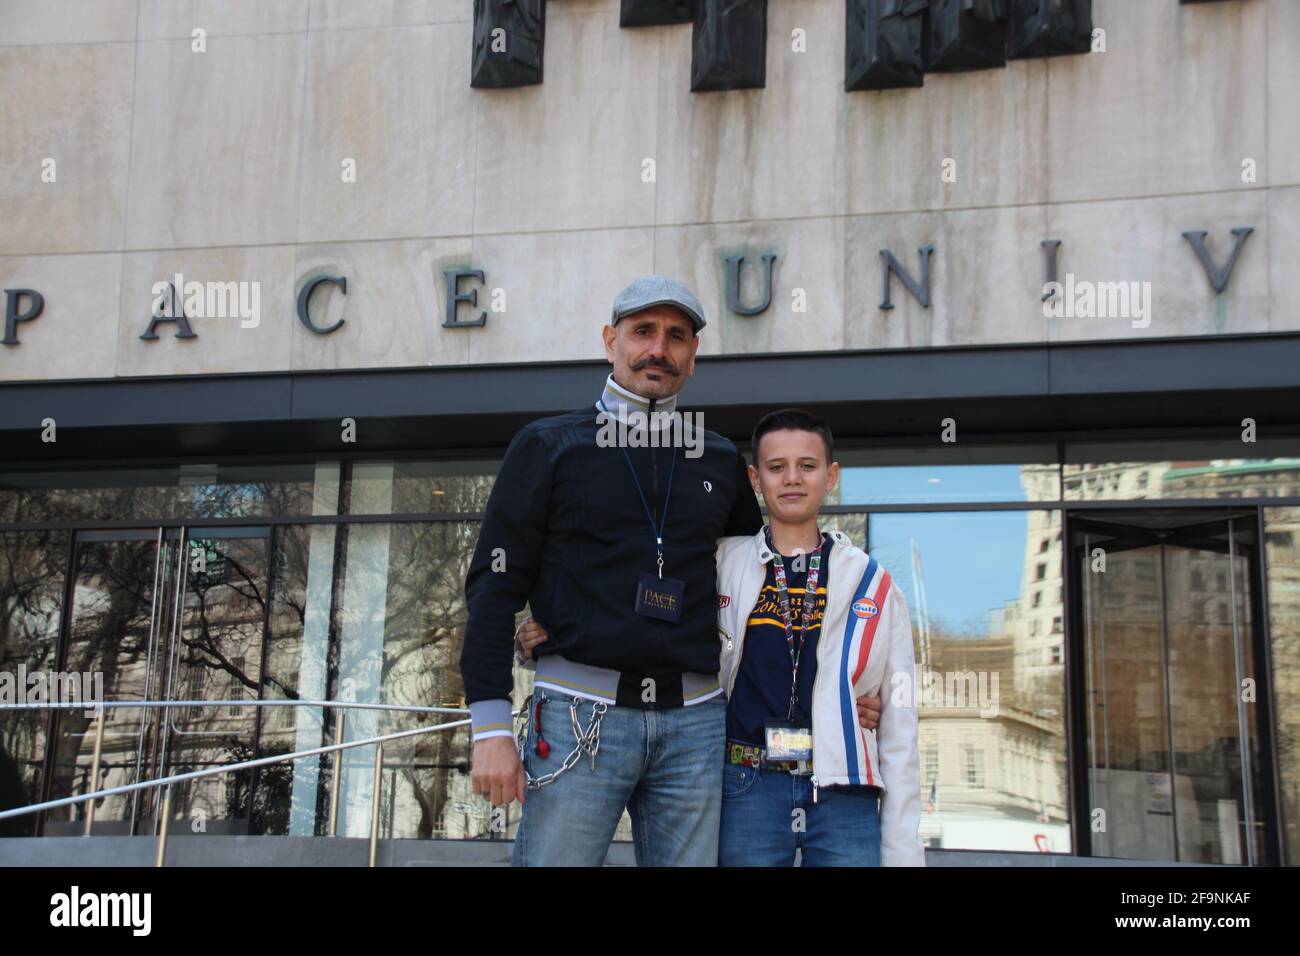 New York, USA. 23rd Mar, 2021. Bardia Gharib (l) stands proudly with his son Shahab Gharib in front of the entrance to Pace University. The 13-year-old, who was born in Bruchsal, Baden-Württemberg, and moved to Florida with his parents as a toddler, has been studying at New York's renowned Pace University since this spring - as one of the youngest students in the history of the educational institution. Credit: Christina Horsten/dpa/Alamy Live News Stock Photo